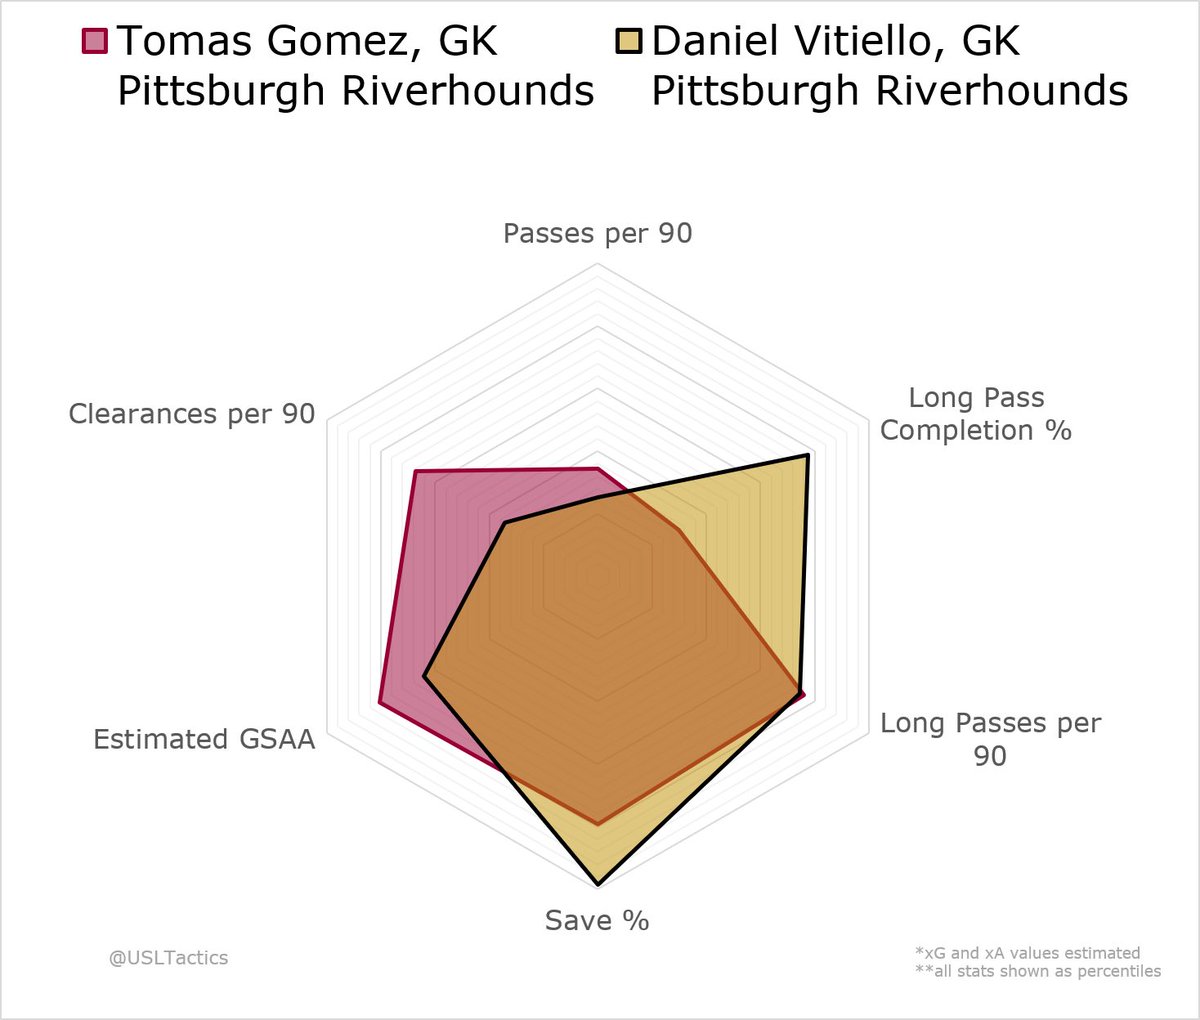 Tomas Gomez exited for the Western Conference, but he and Vitiello exactly split regular season minutes in goal last season. Vitiello is a slightly better distributor and gives you comparable shot-stopping skills.